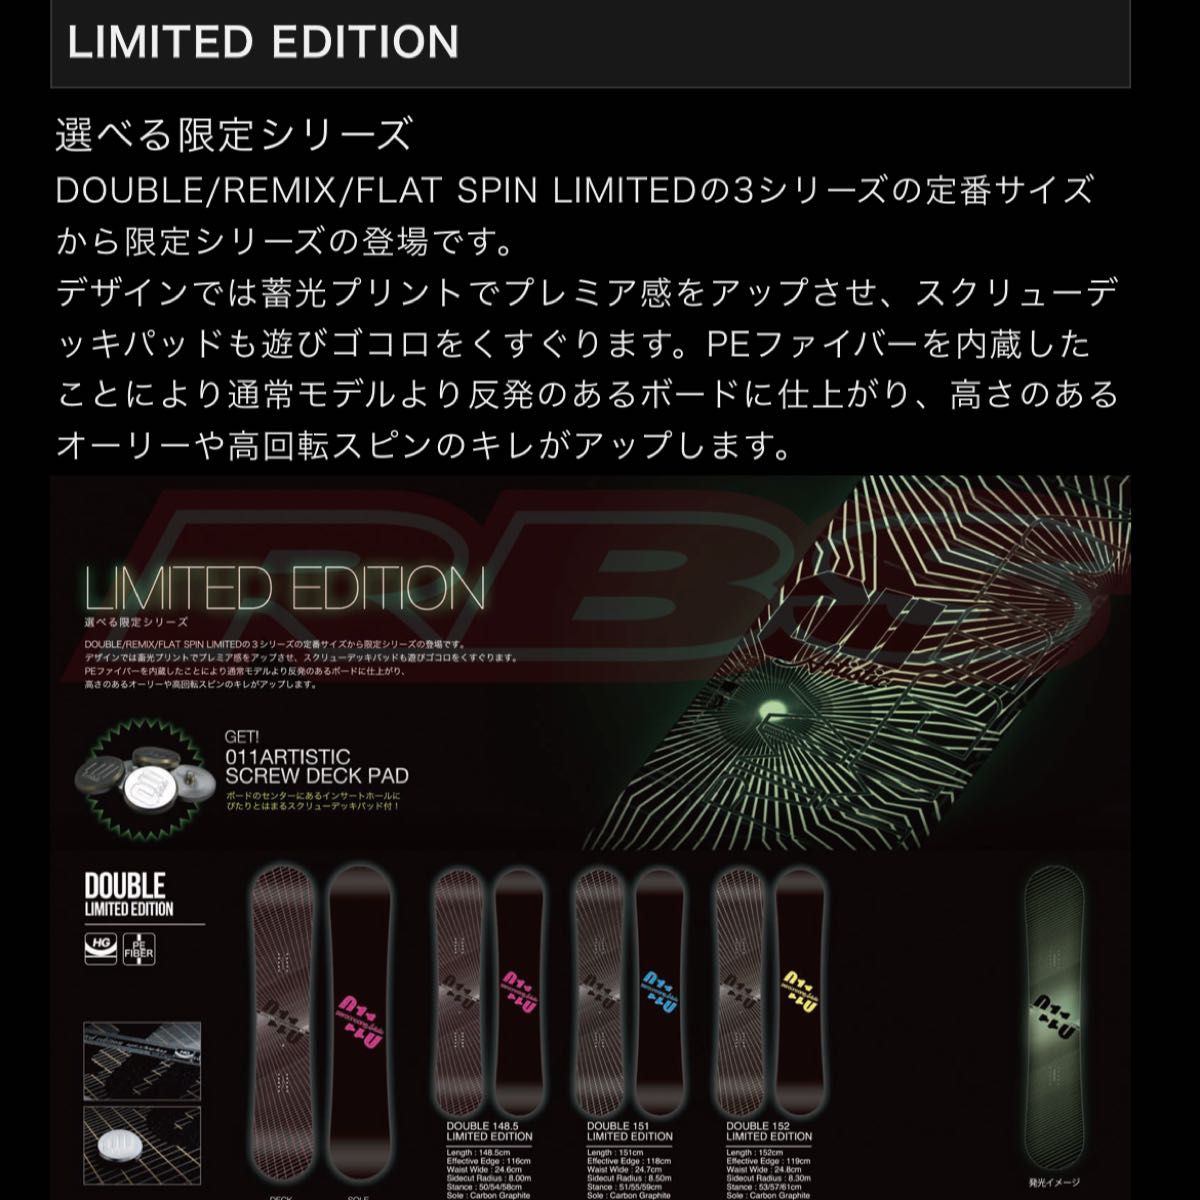 011 Artistic DOUBLE LIMITED EDITION｜Yahoo!フリマ（旧PayPayフリマ）